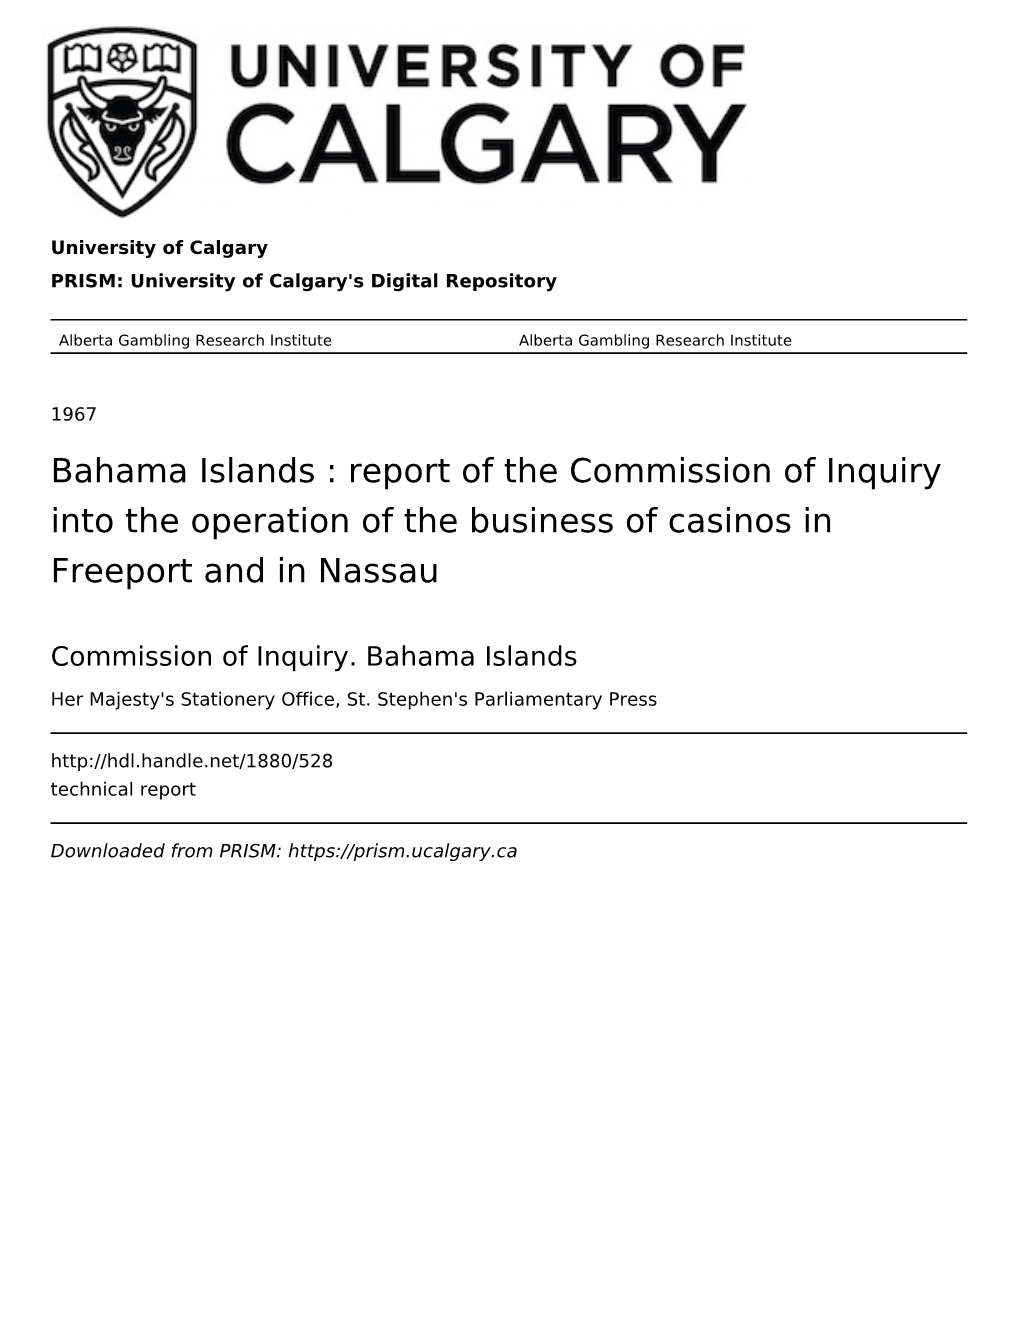 Bahama Islands : Report of the Commission of Inquiry Into the Operation of the Business of Casinos in Freeport and in Nassau